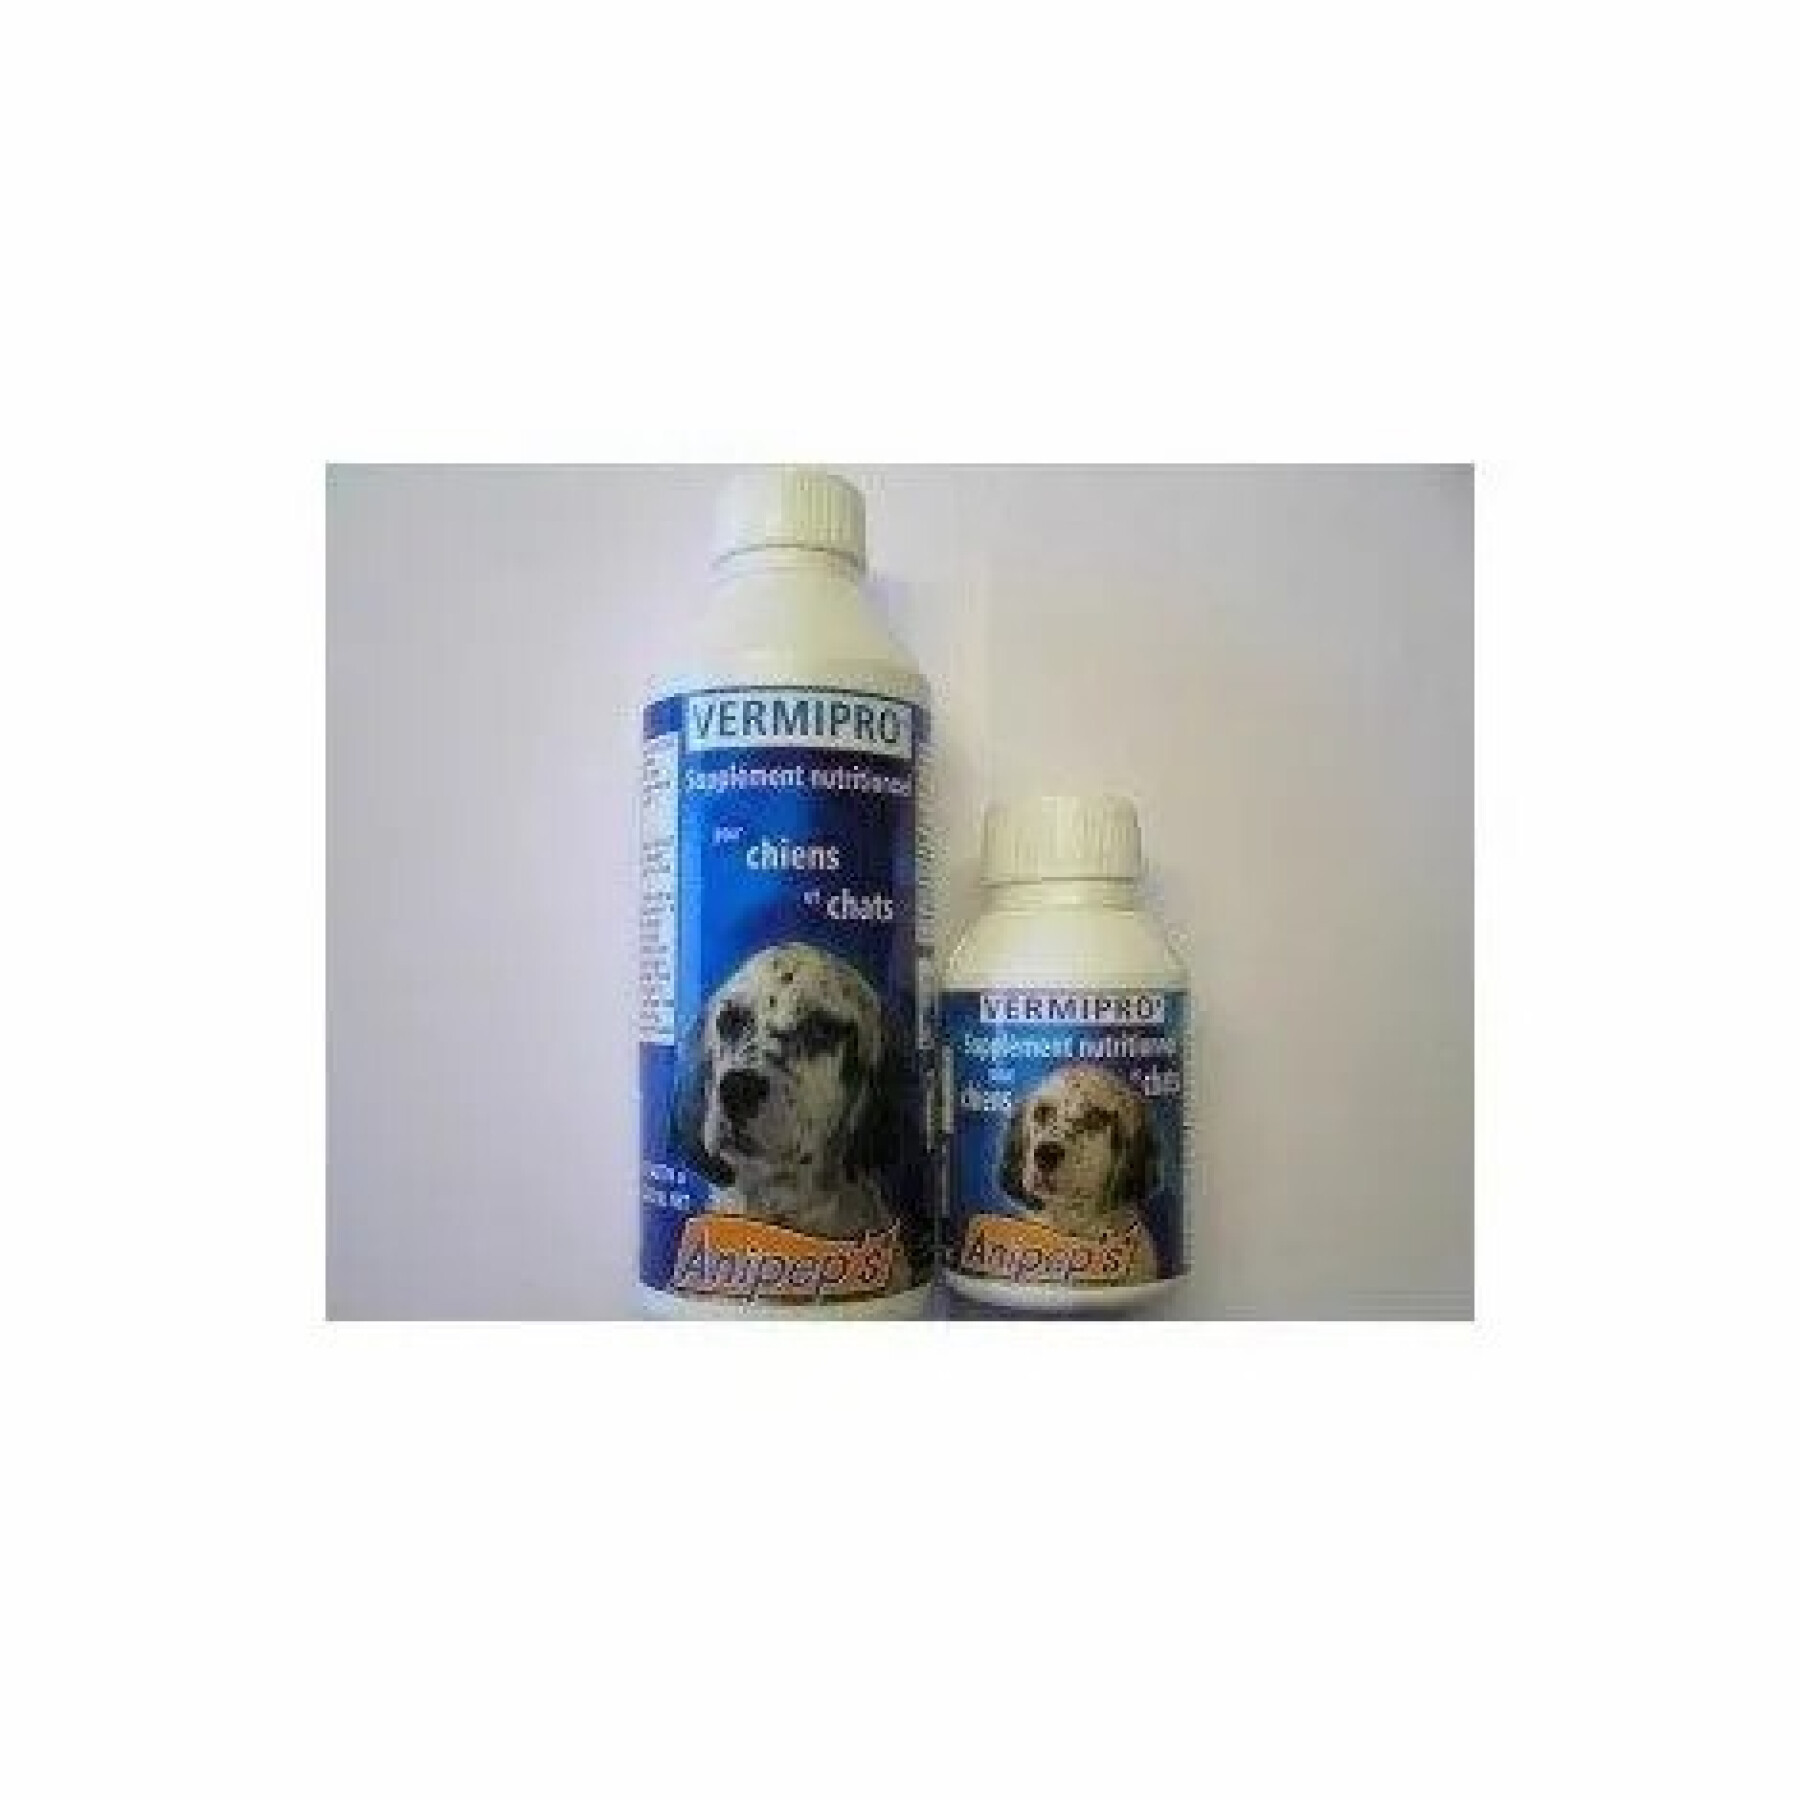 Pest control for dogs Gamiferme Vermipro